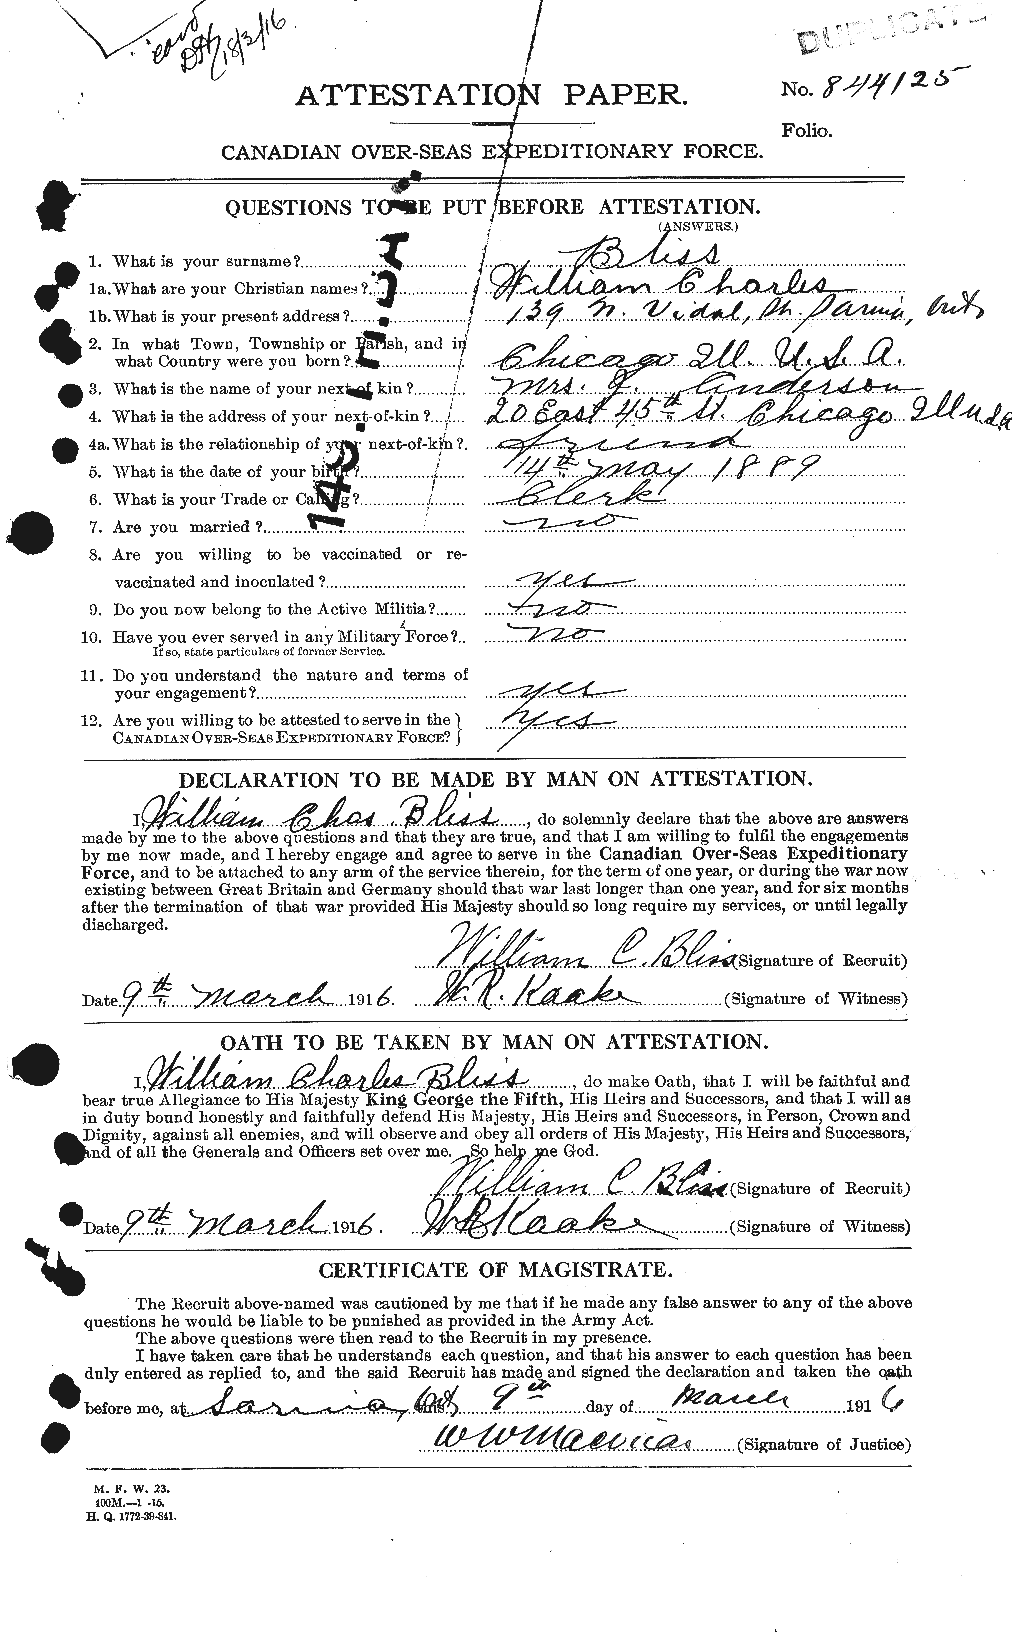 Personnel Records of the First World War - CEF 248380a